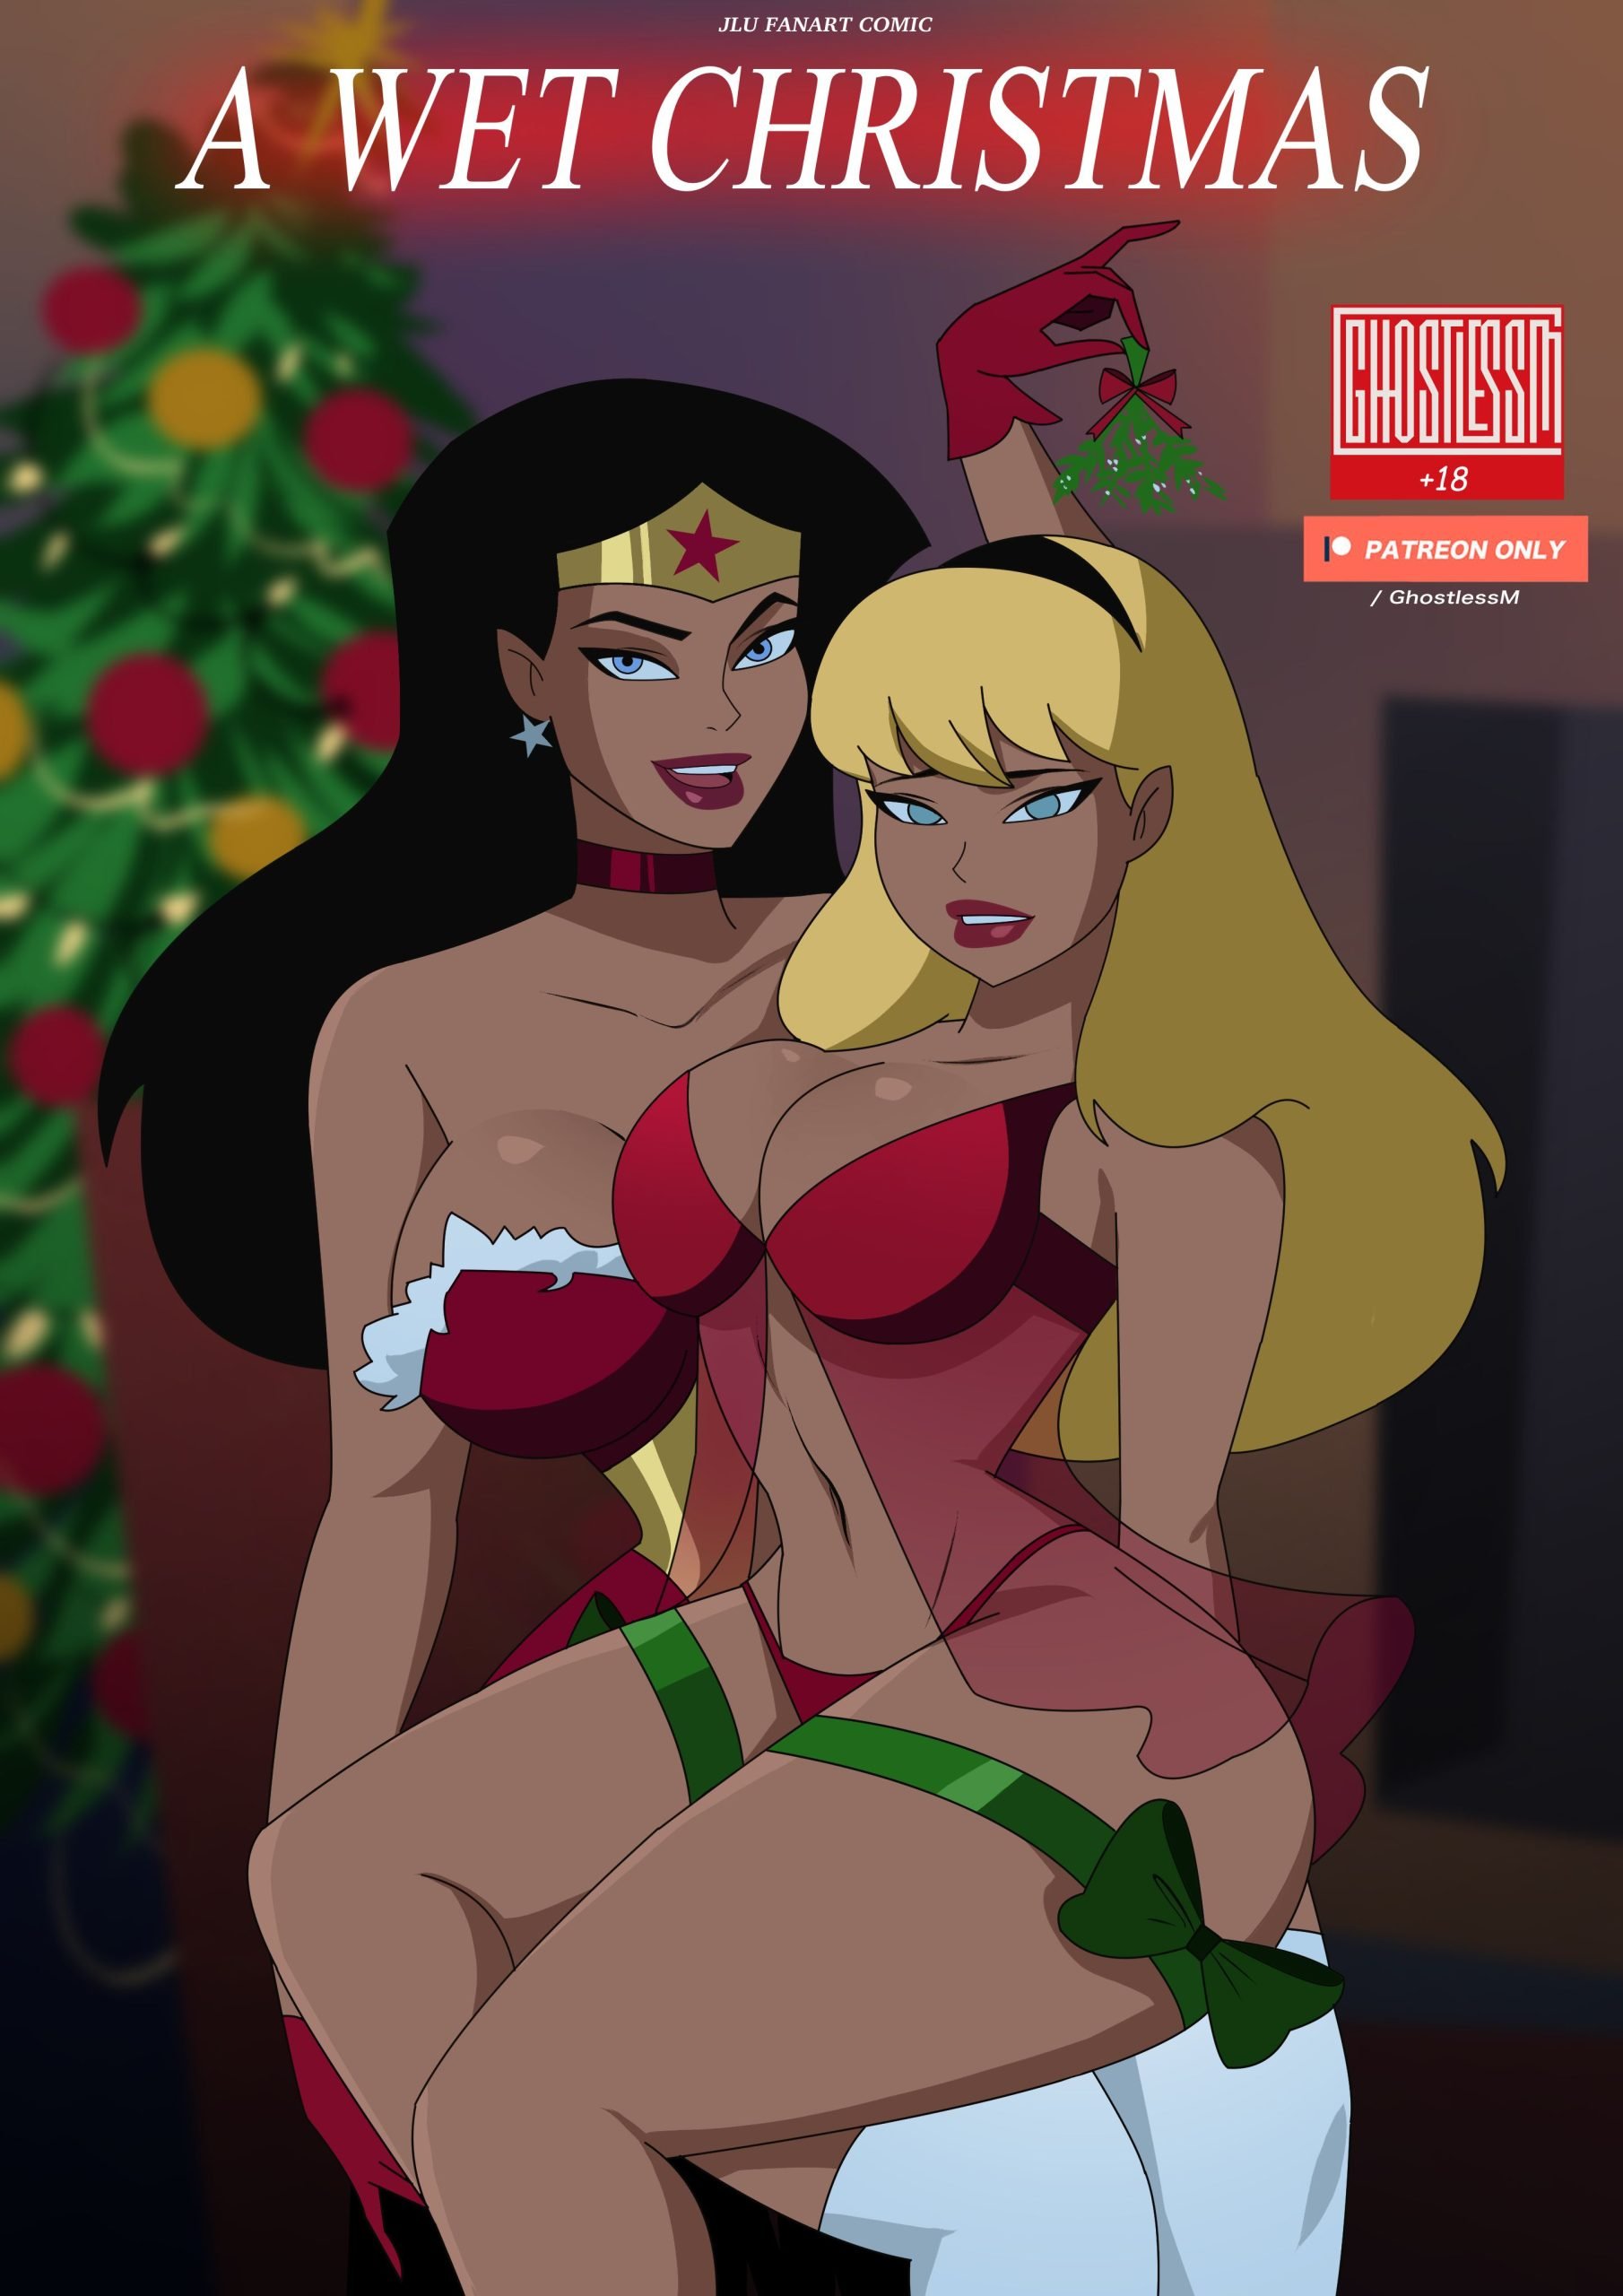 A Wet Christmas (Justice League) GhostlessM Porn Comic pic